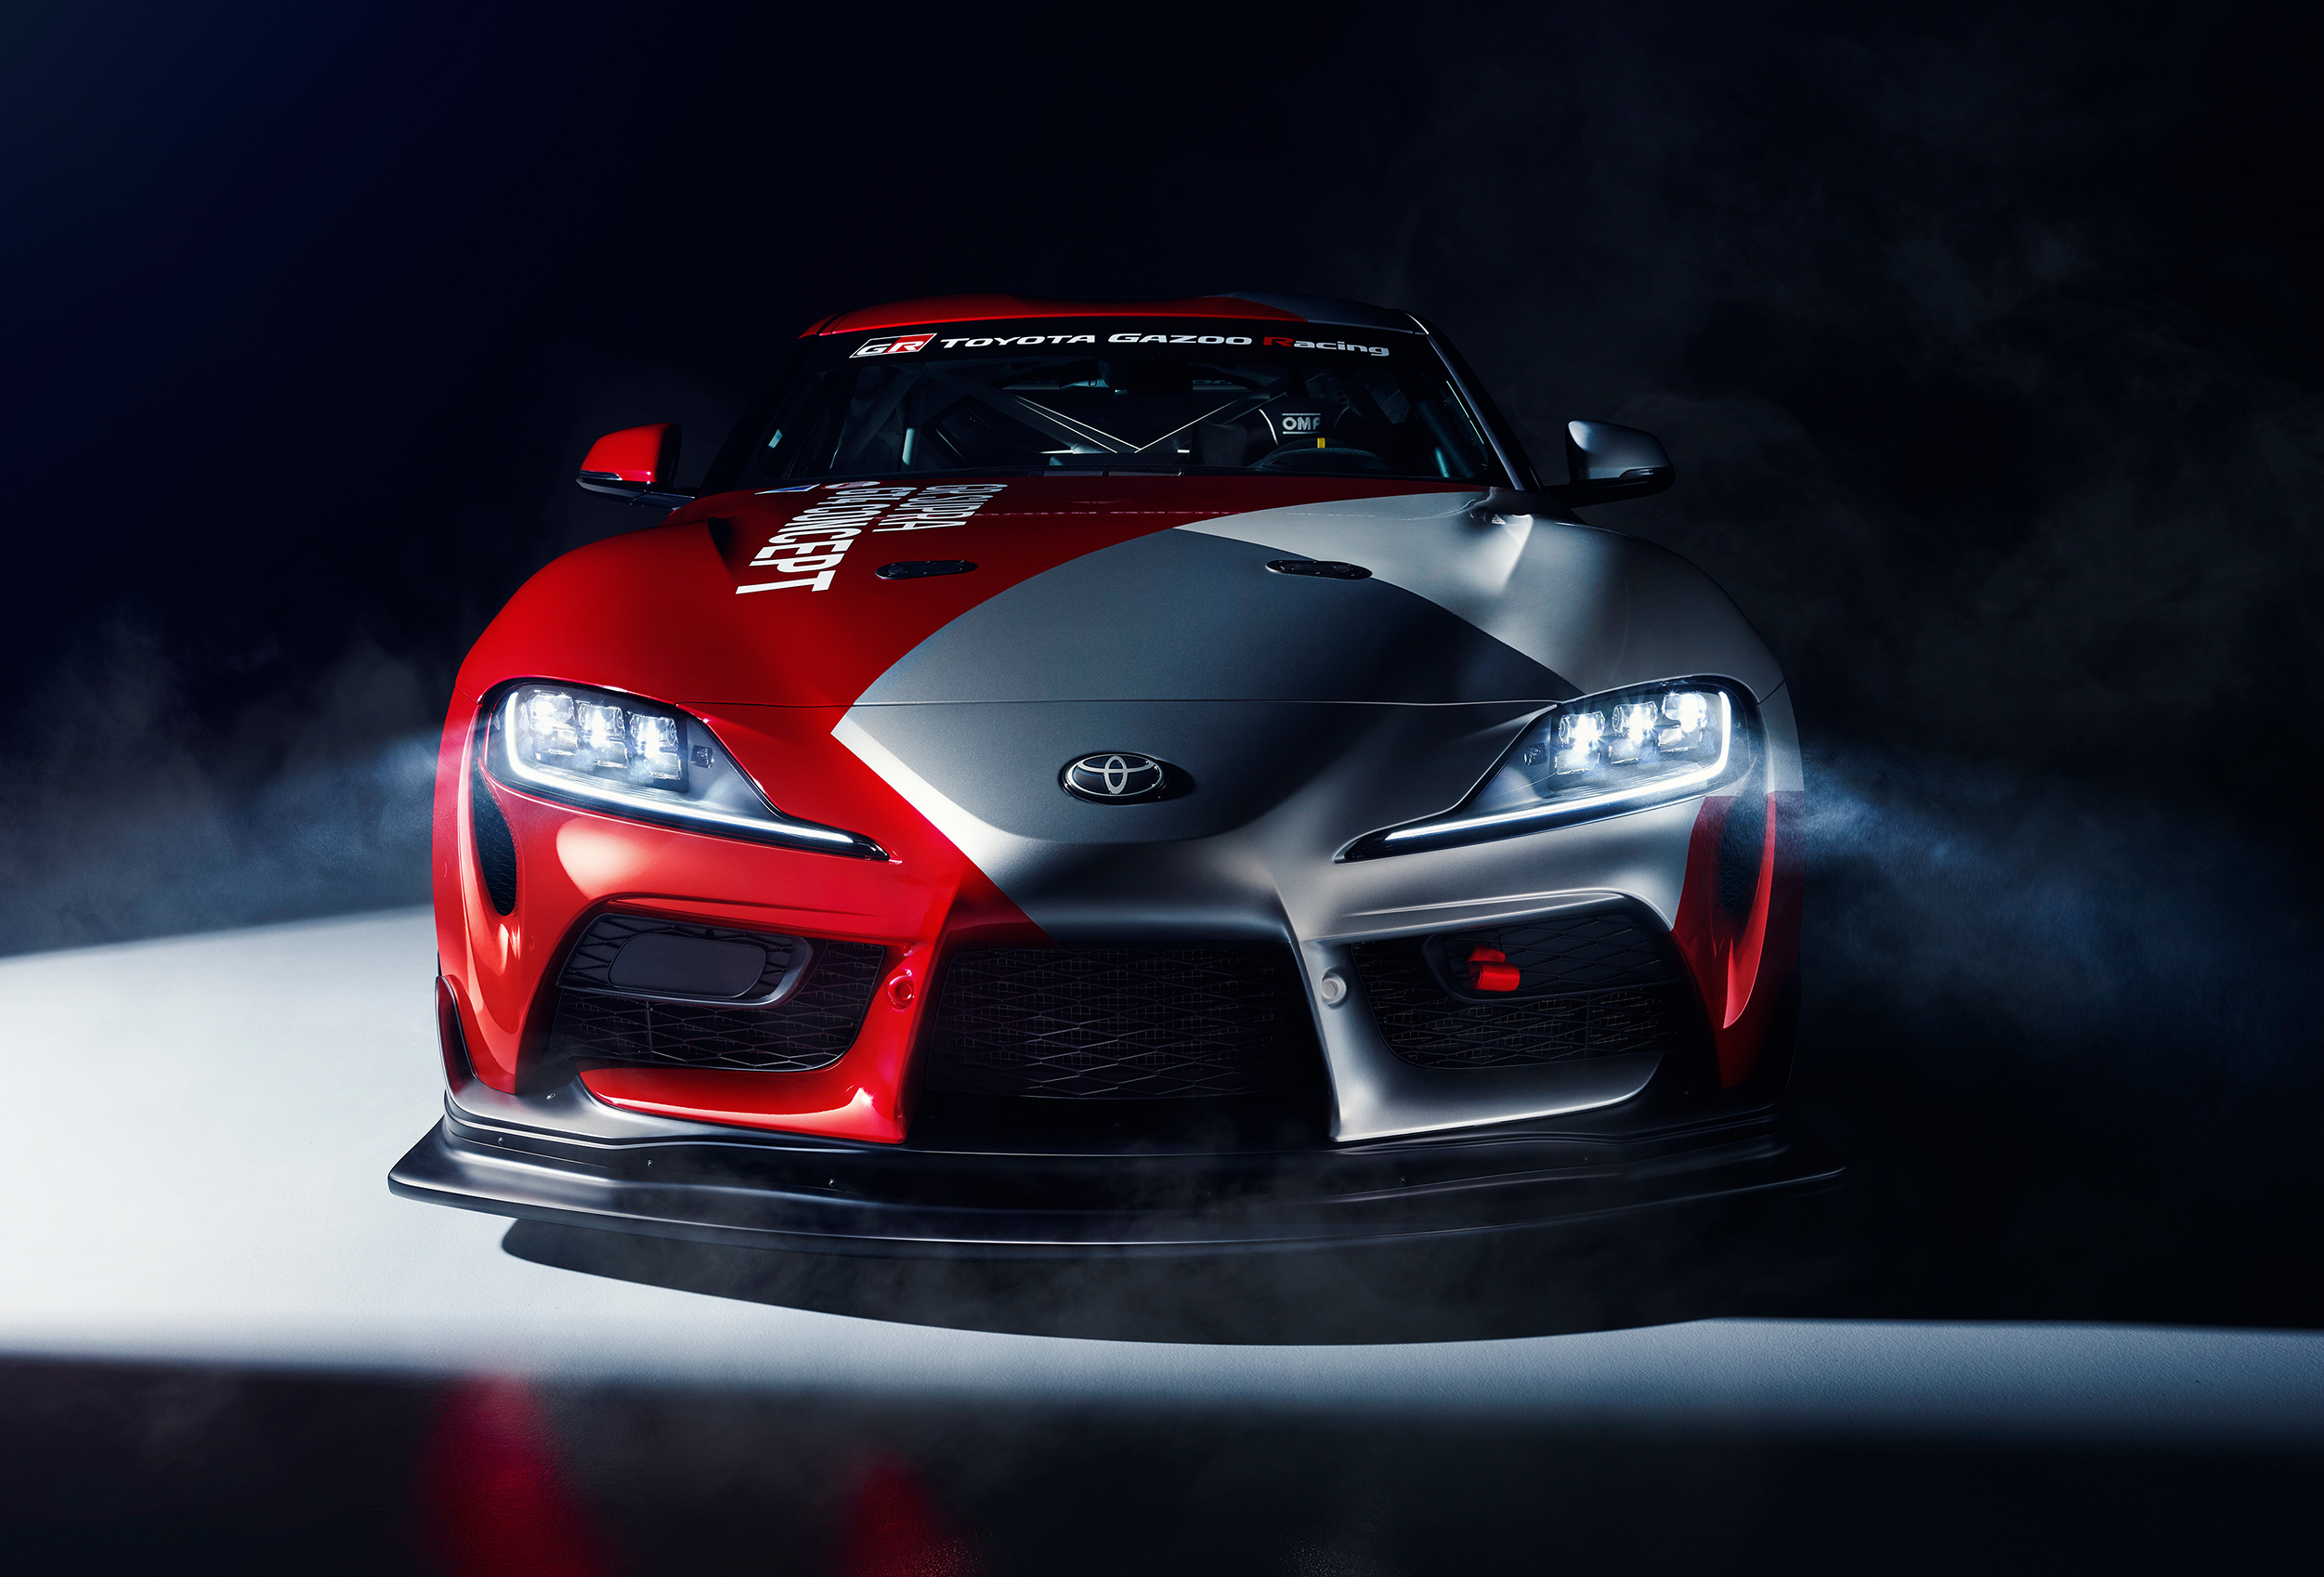 Toyota Supra Toyota GR Supra Race Cars Livery Car Toyota Japanese Cars Concept Cars Frontal View Toy 2502x1698